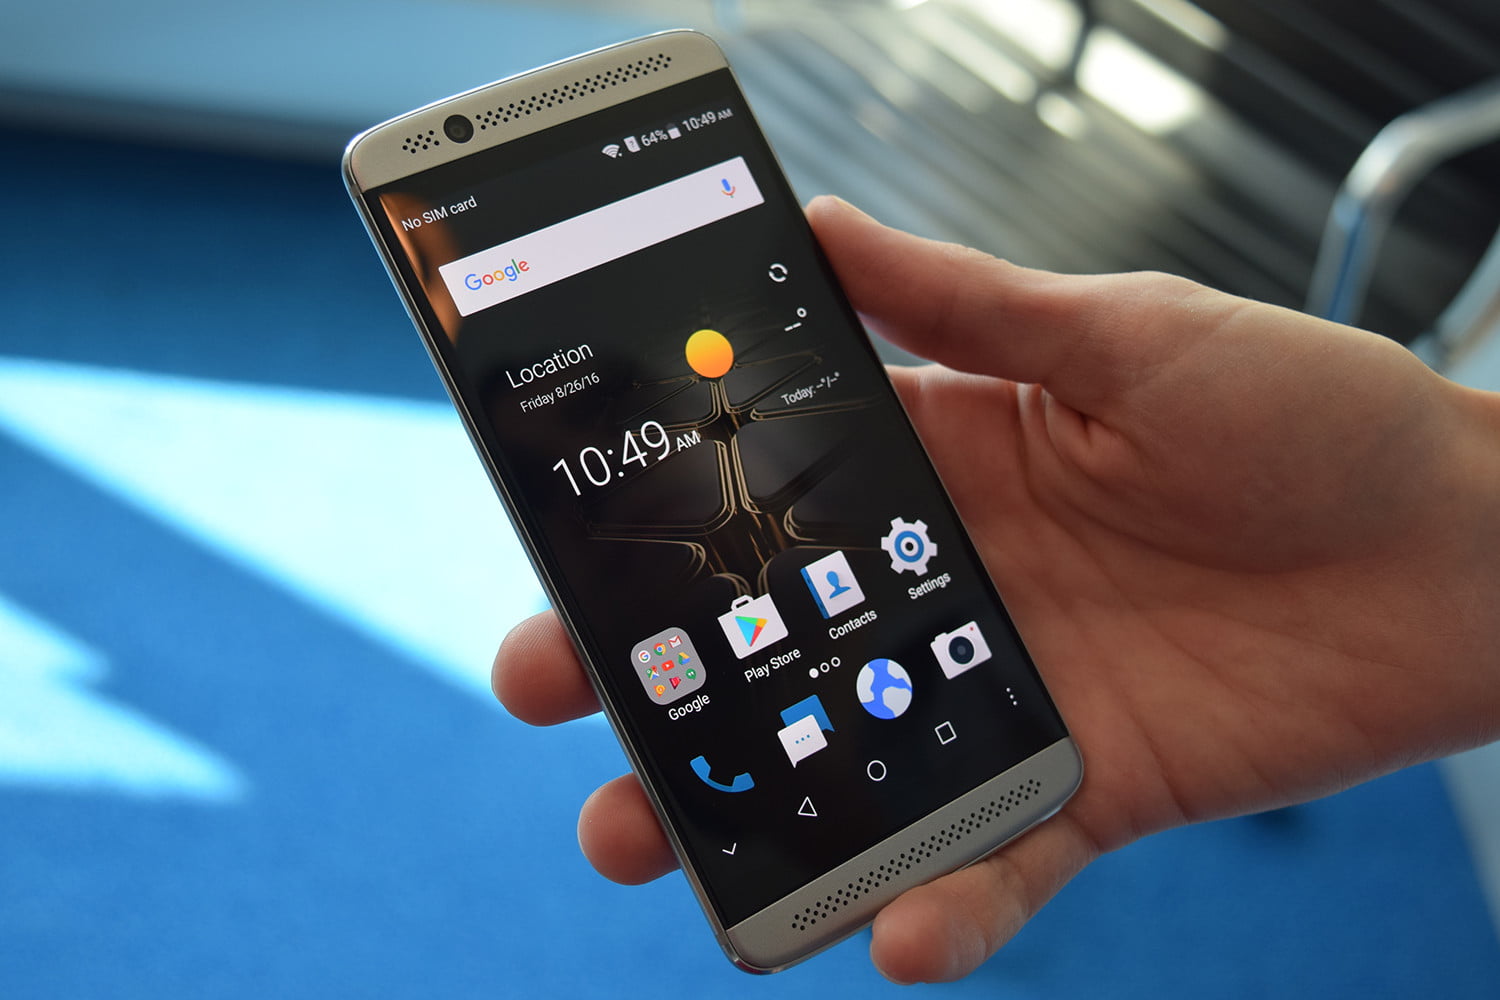 zte-axon-7-mini-smartphone-review-news-price-features